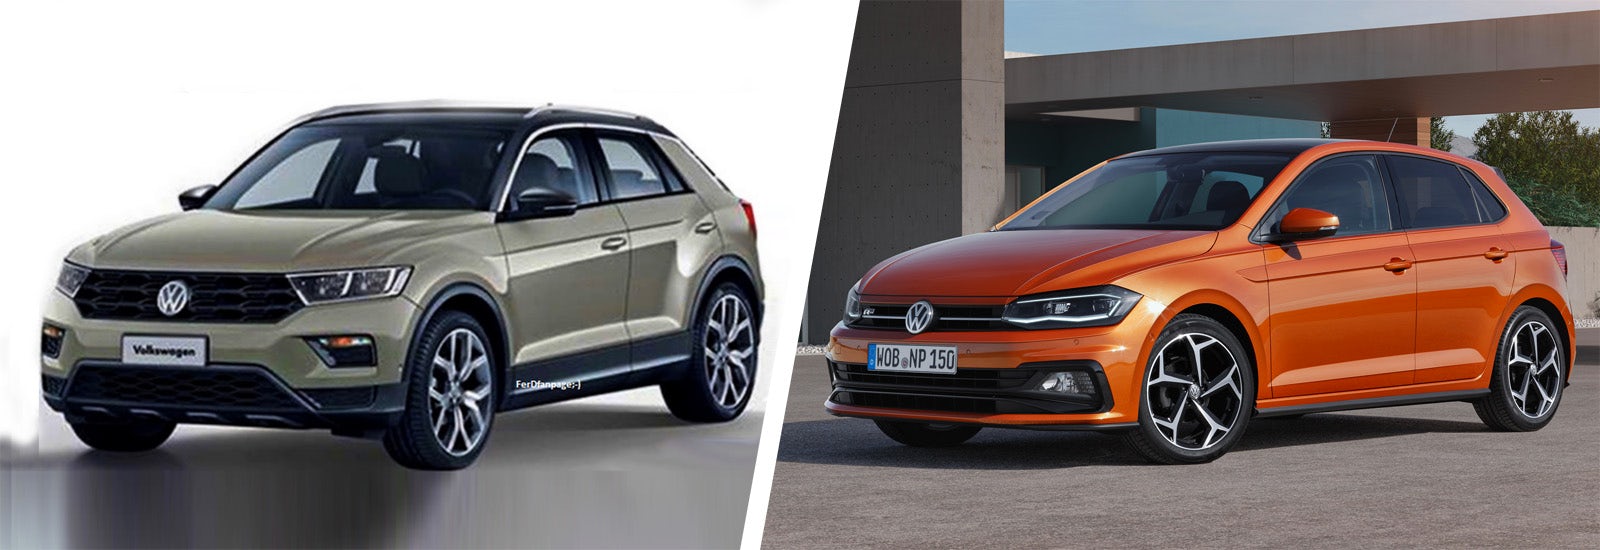 2018 VW TRoc price, specs and release date carwow